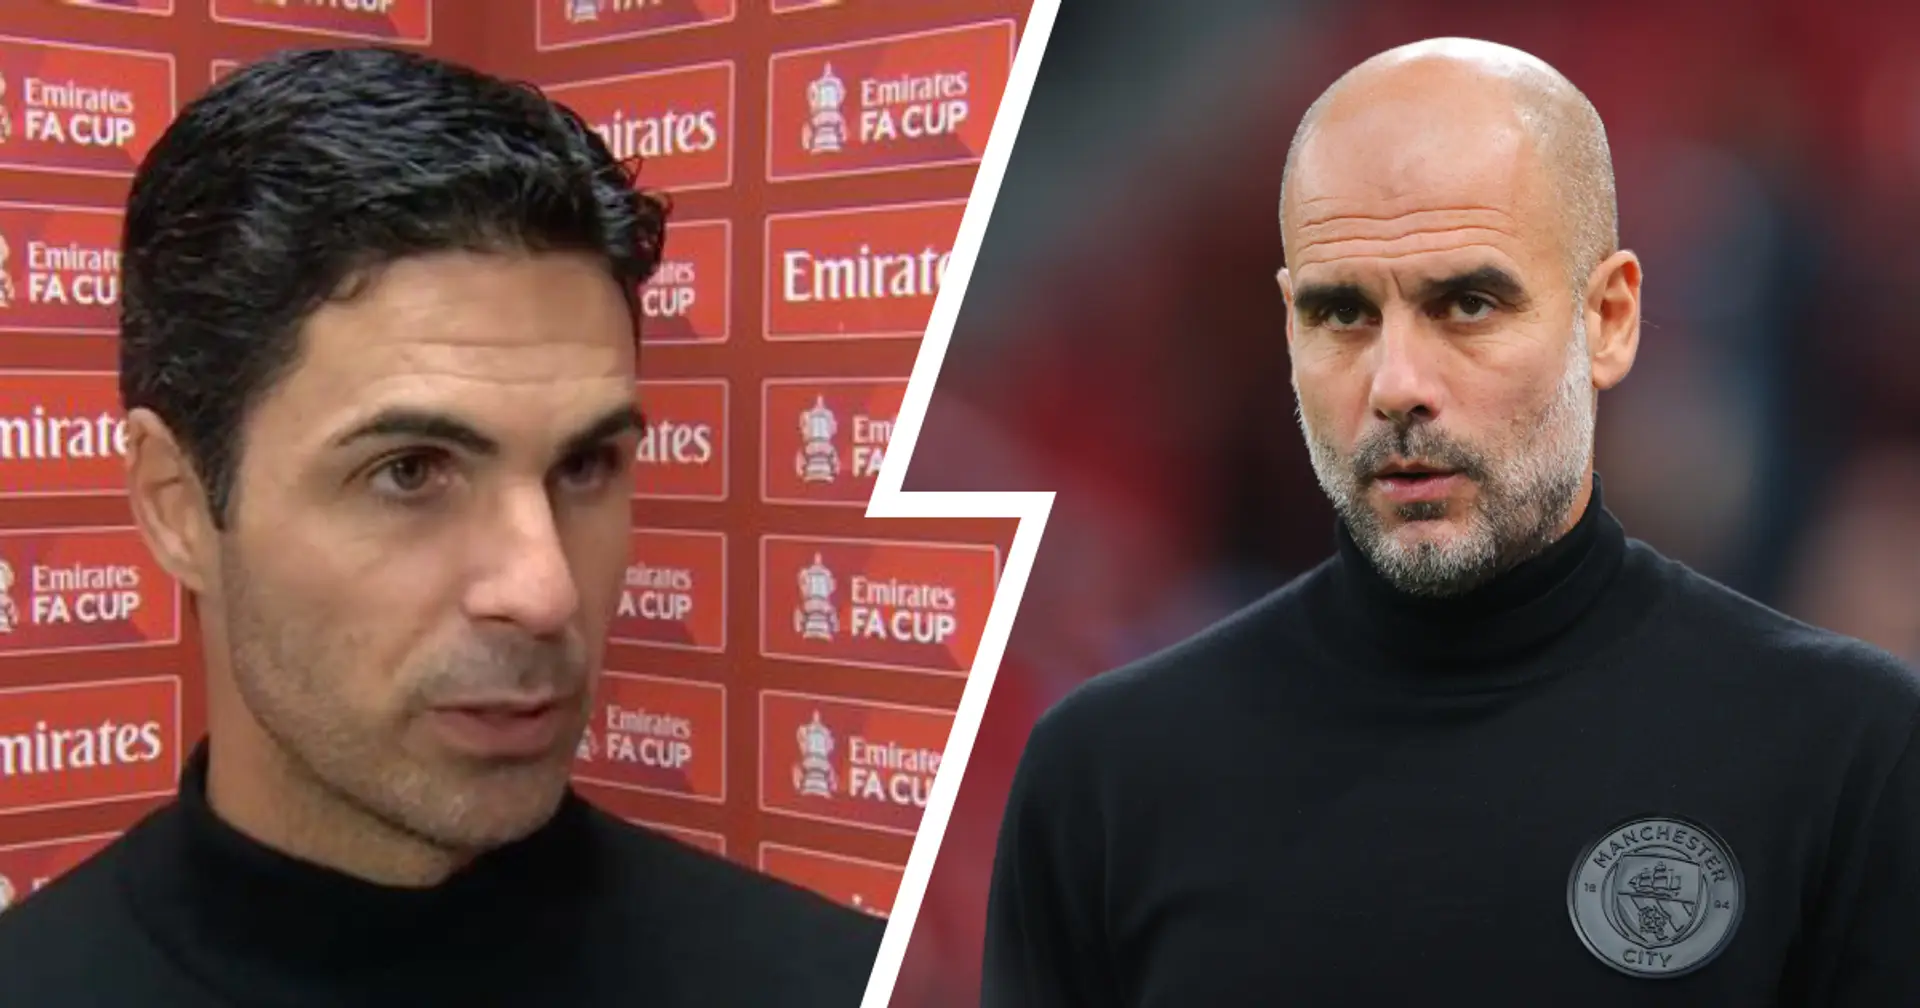 'We know each other really well': Mikel Arteta reacts to FA Cup draw against Man City